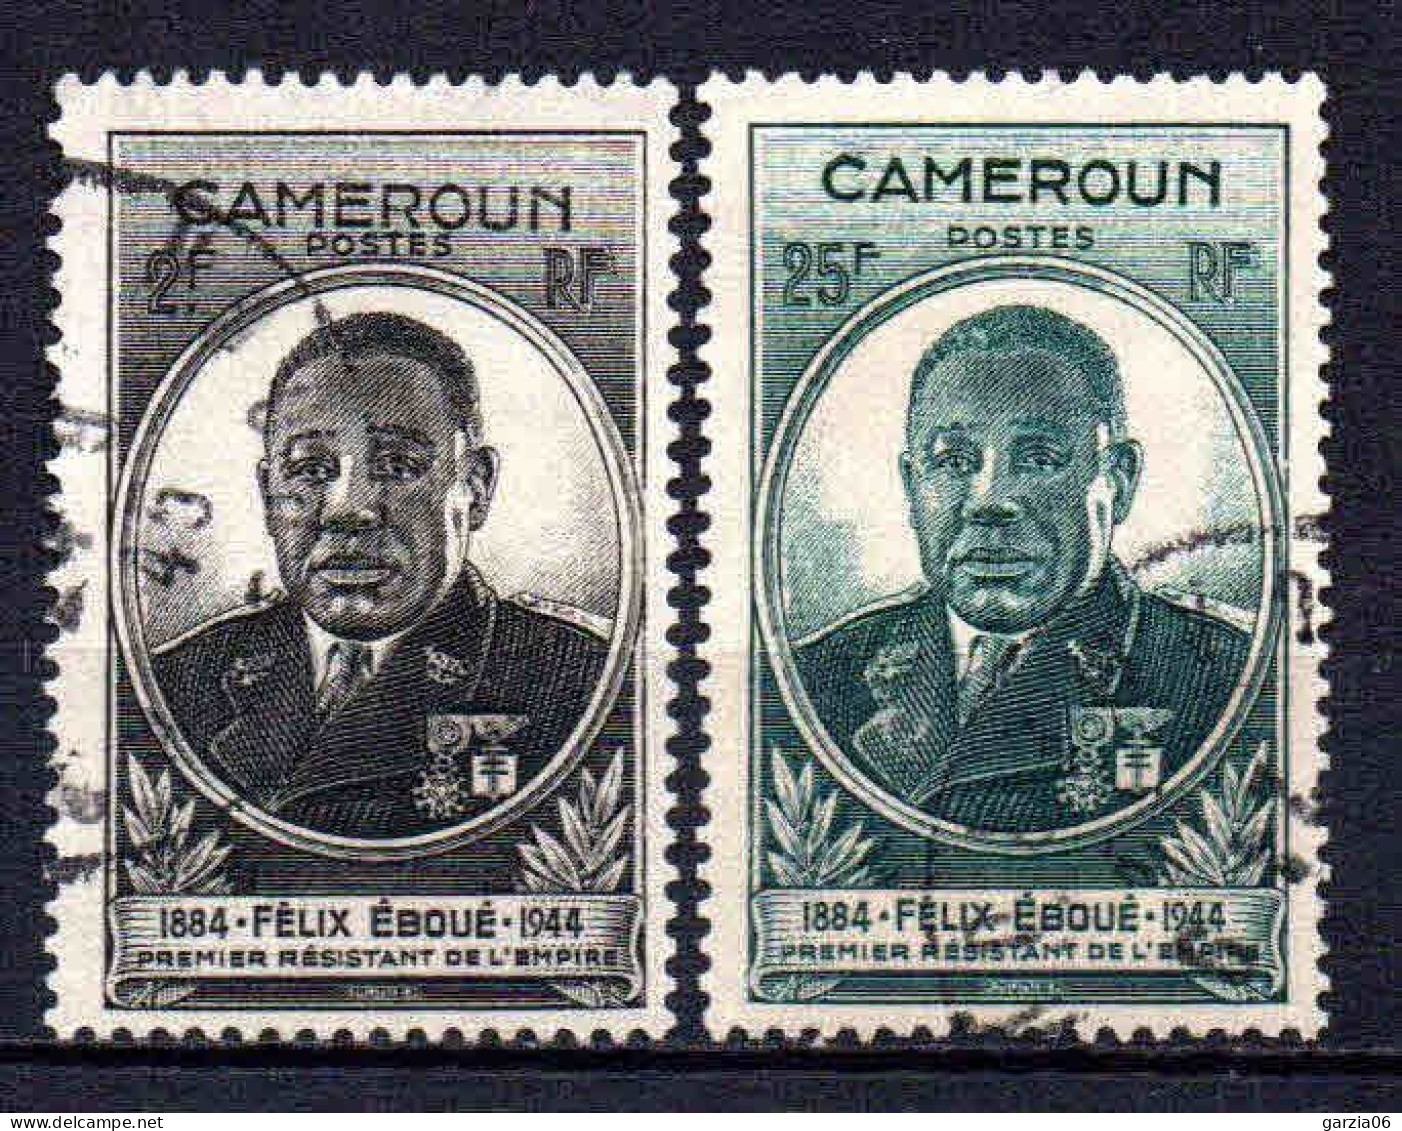 Cameroun - 1945 - Félix Eboué  - N° 274/275  - Oblit - Used - Used Stamps